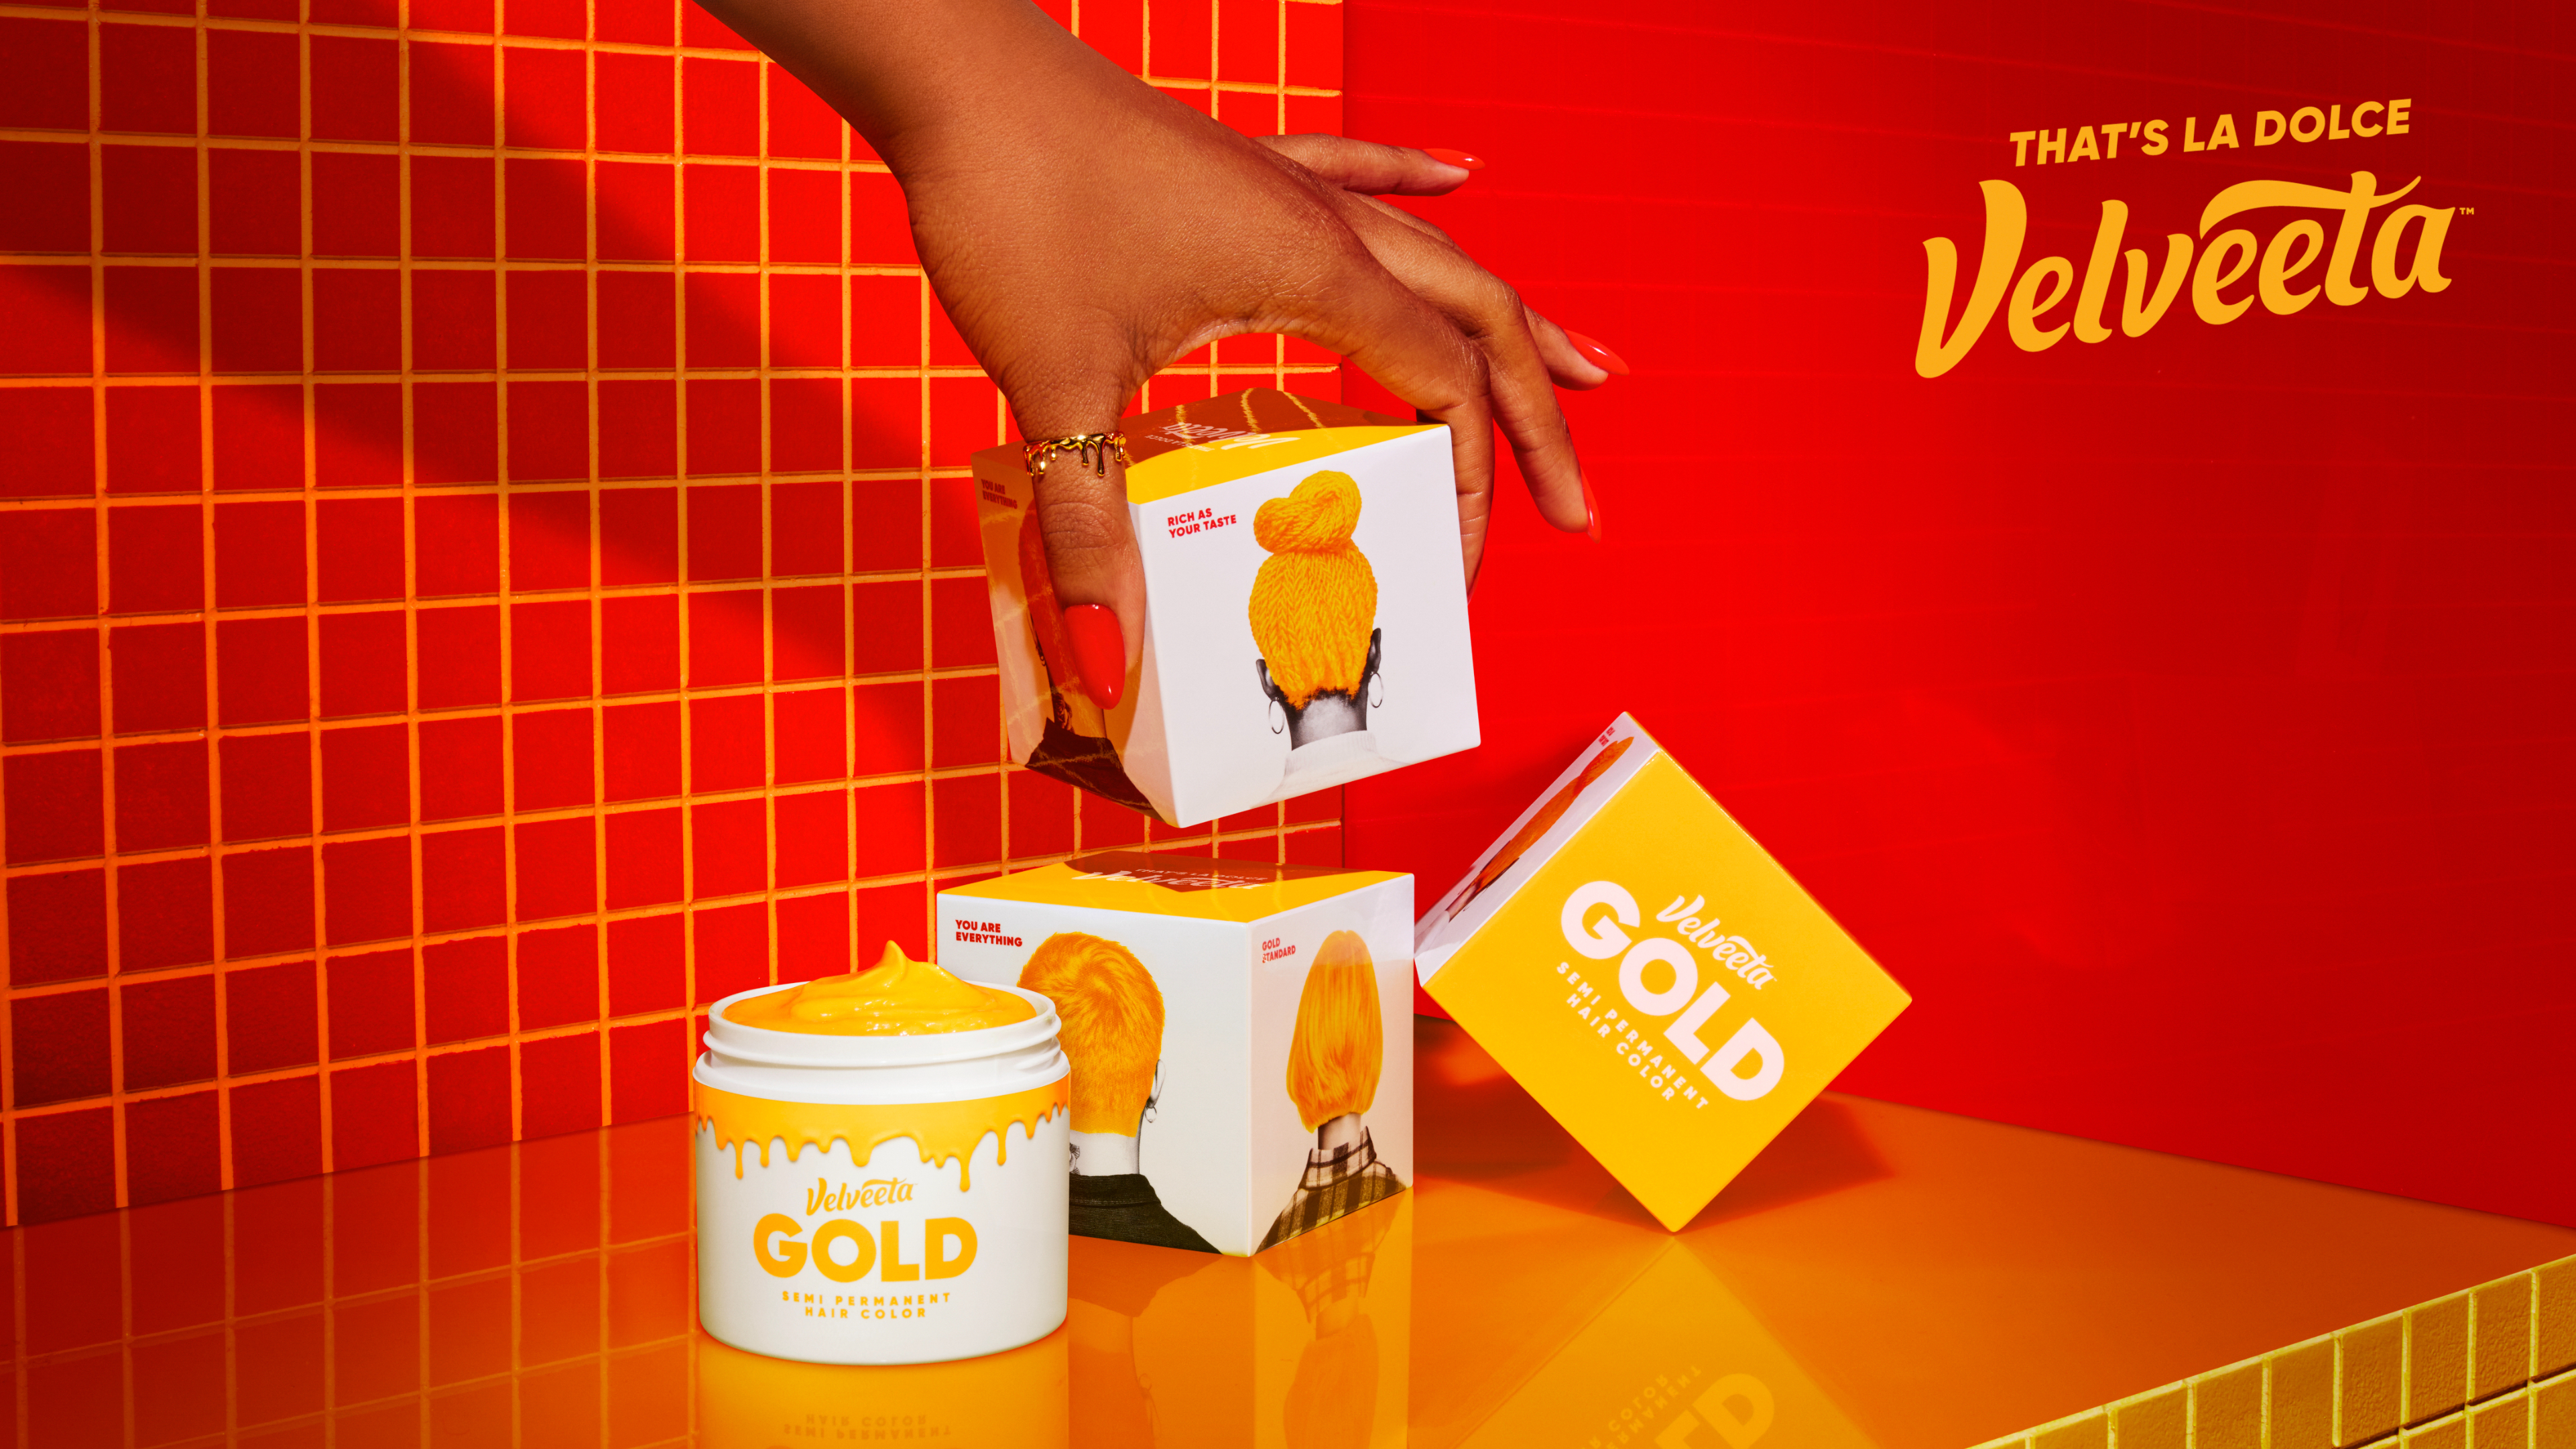 Hand reaching for a Velveeta box in front of a promotional backdrop with products displayed